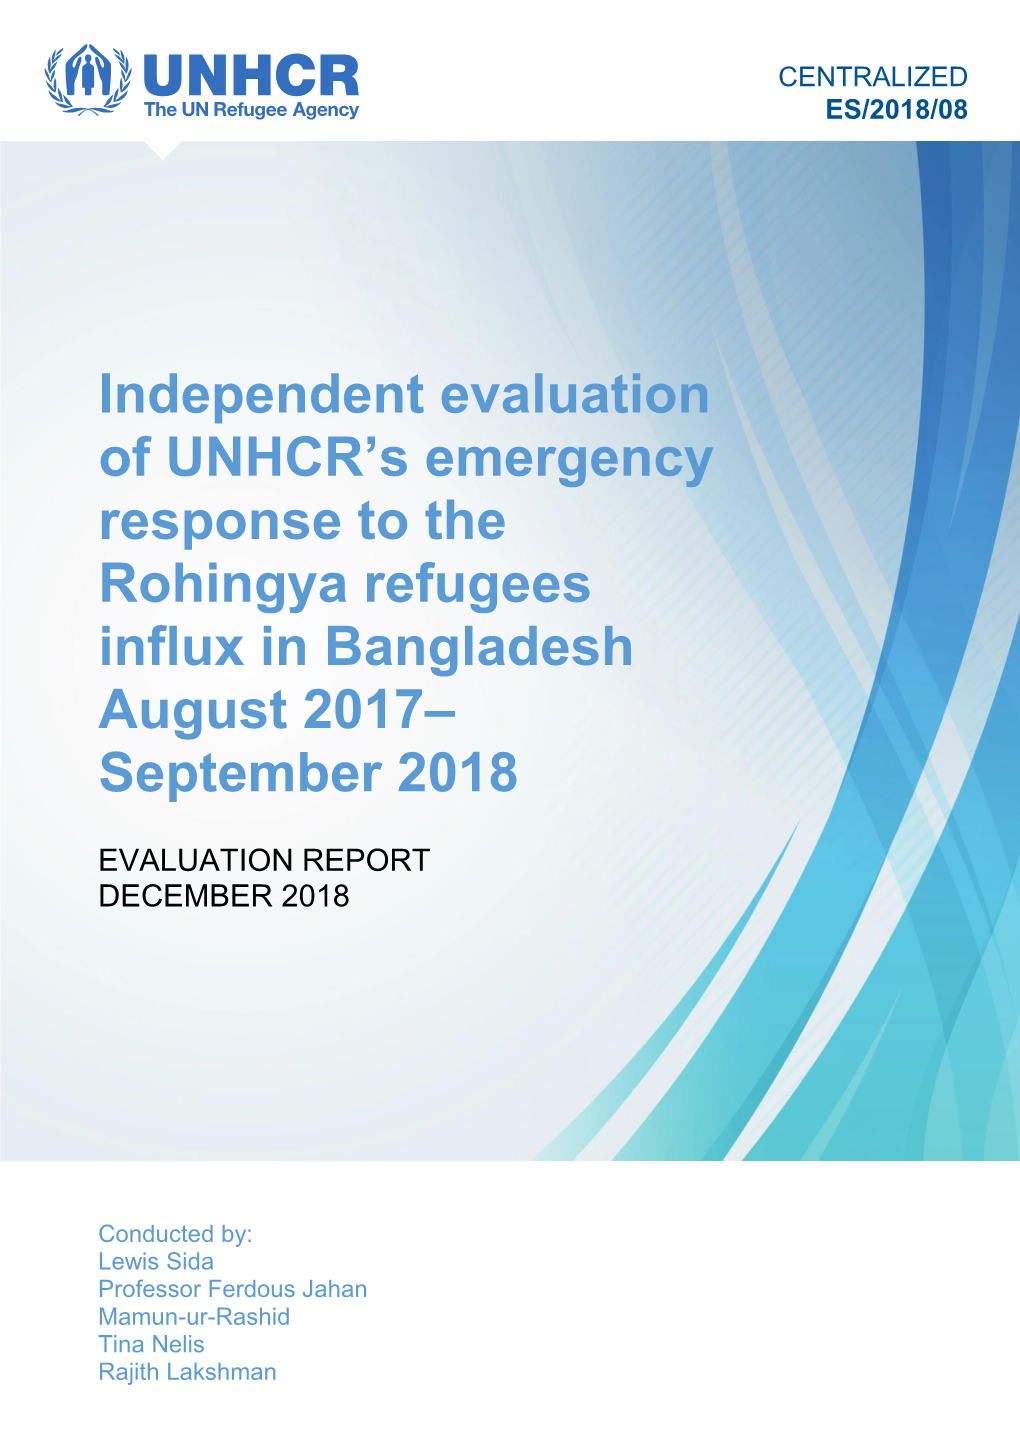 Independent Evaluation of UNHCR's Emergency Response to The